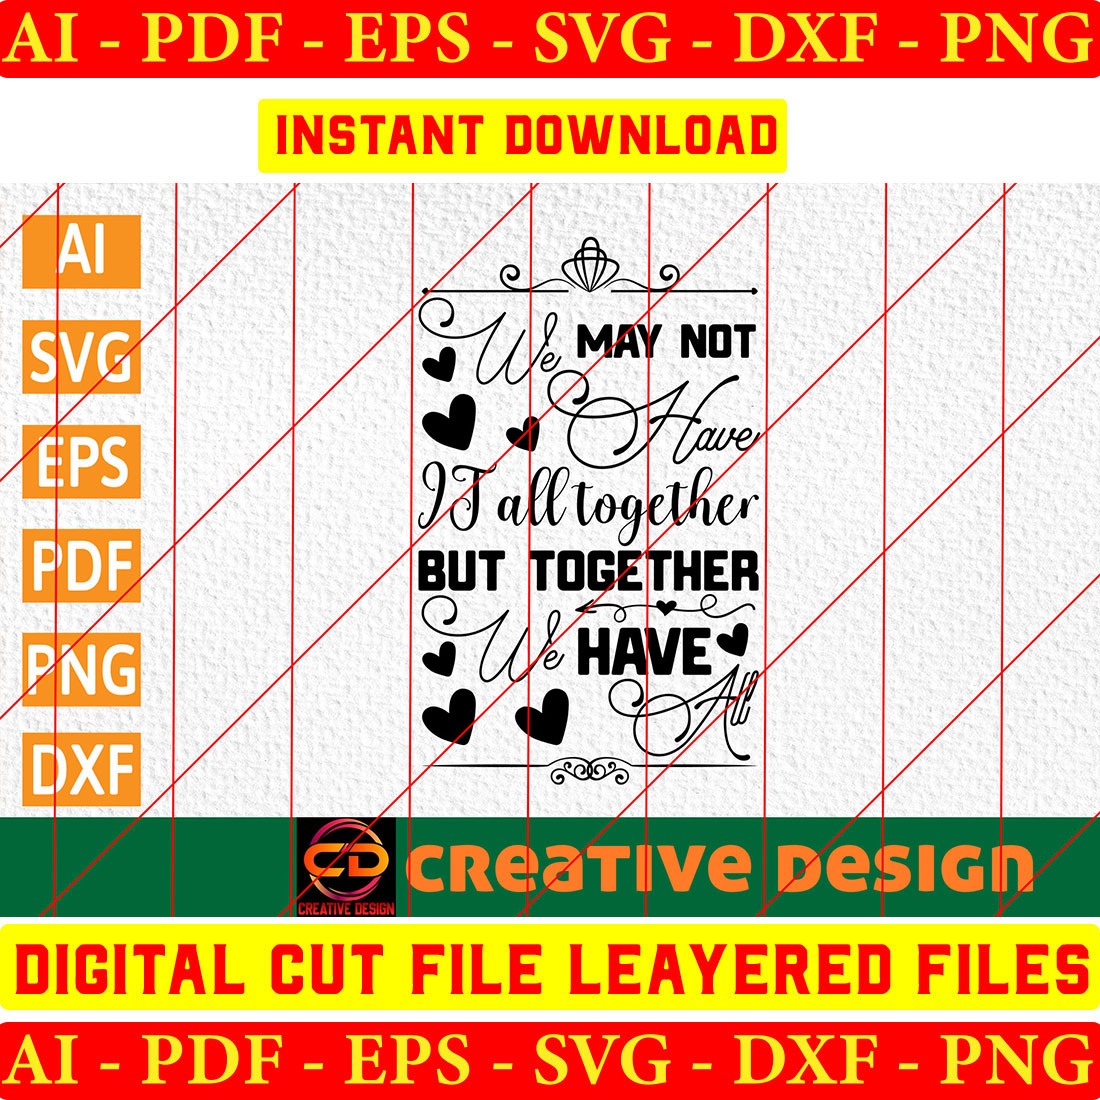 Digital cut file layered files for svg.